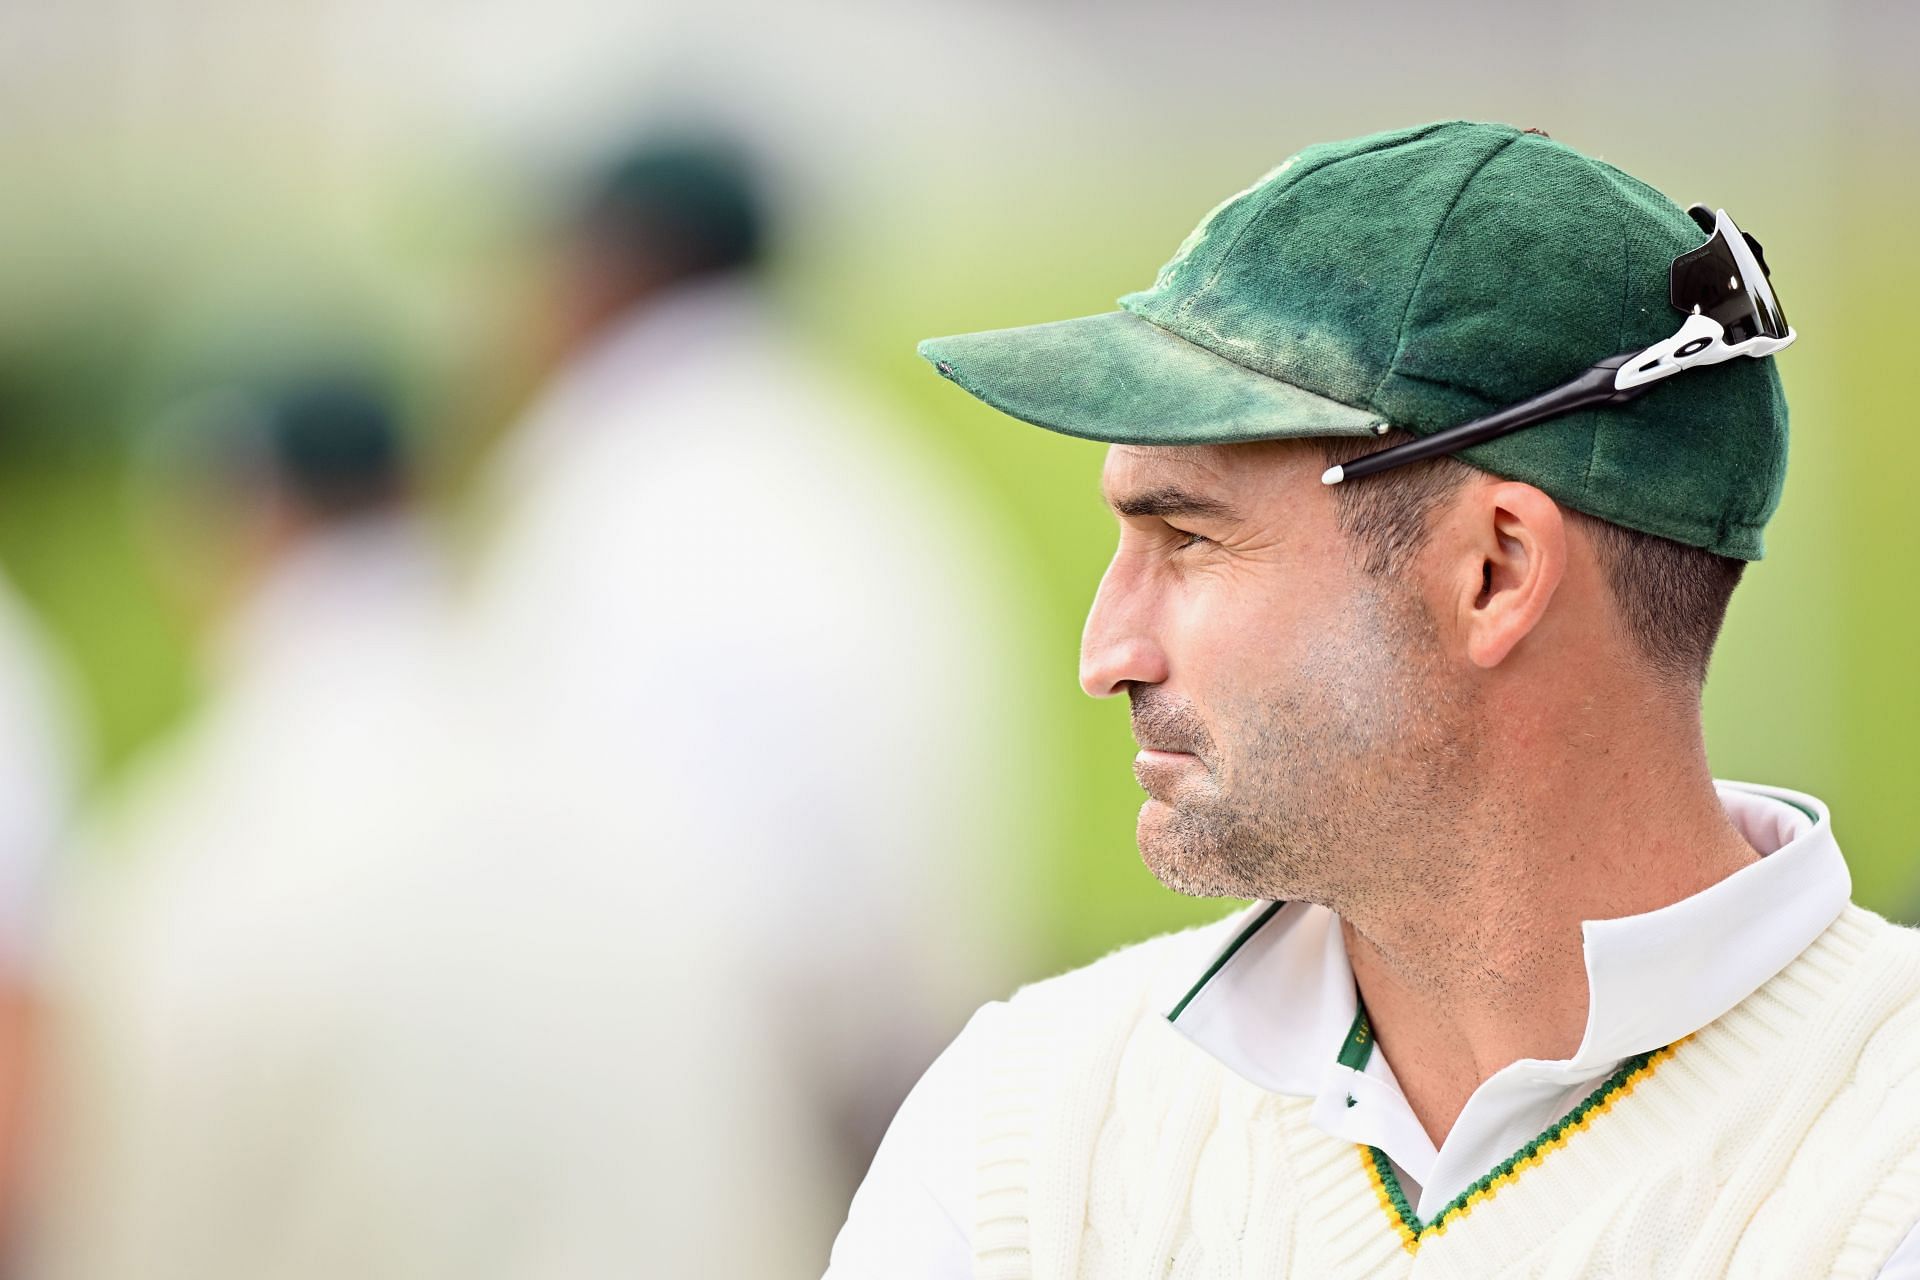 South Africa Test captain Dean Elgar has a touch job at hand (Image Credits: Getty)